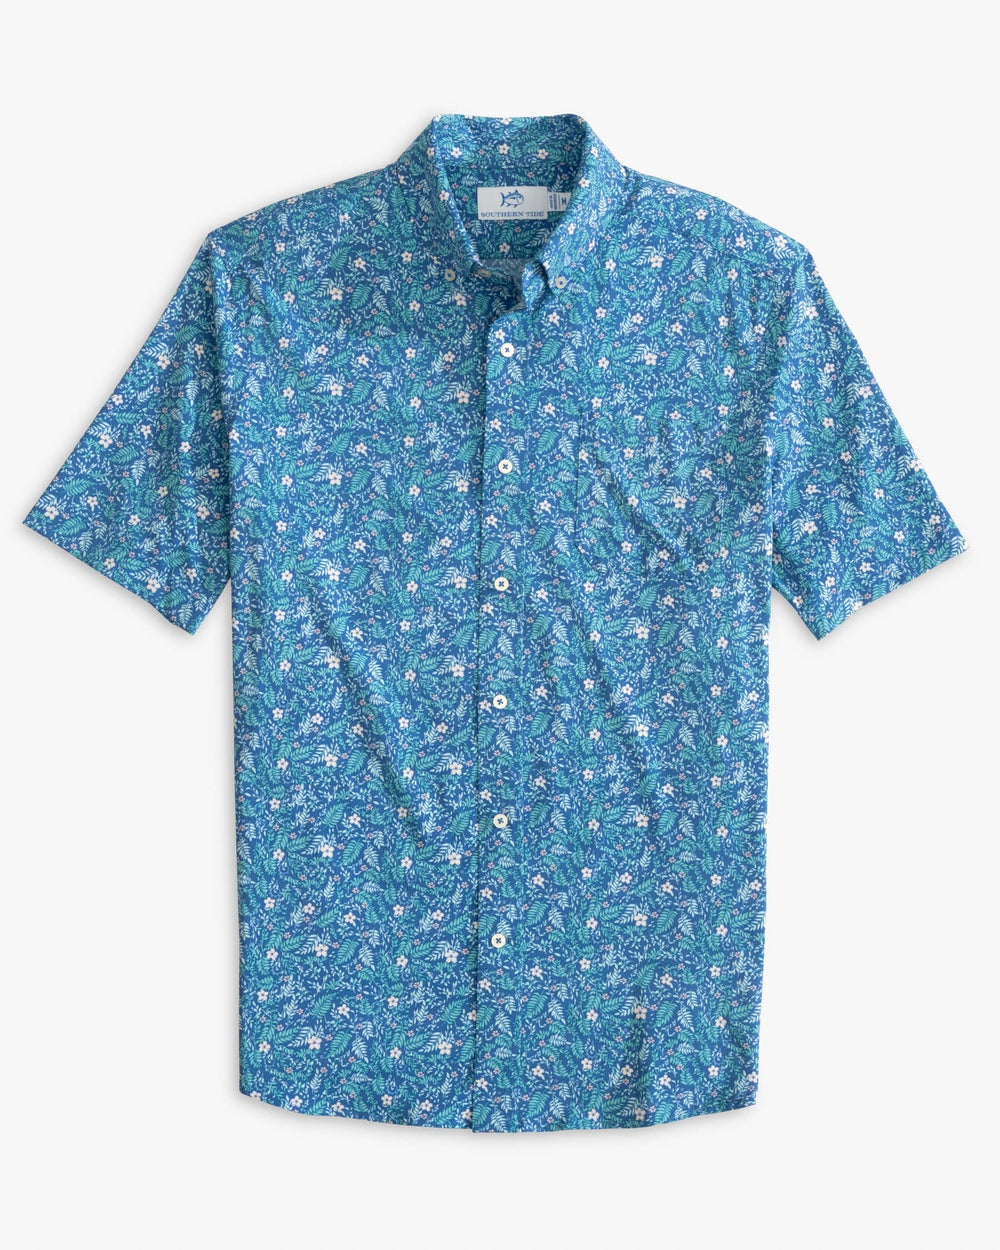 The front view of the Southern Tide Barely Botanical Intercoastal Short Sleeve Button Down Shirt by Southern Tide - Atlantic Blue